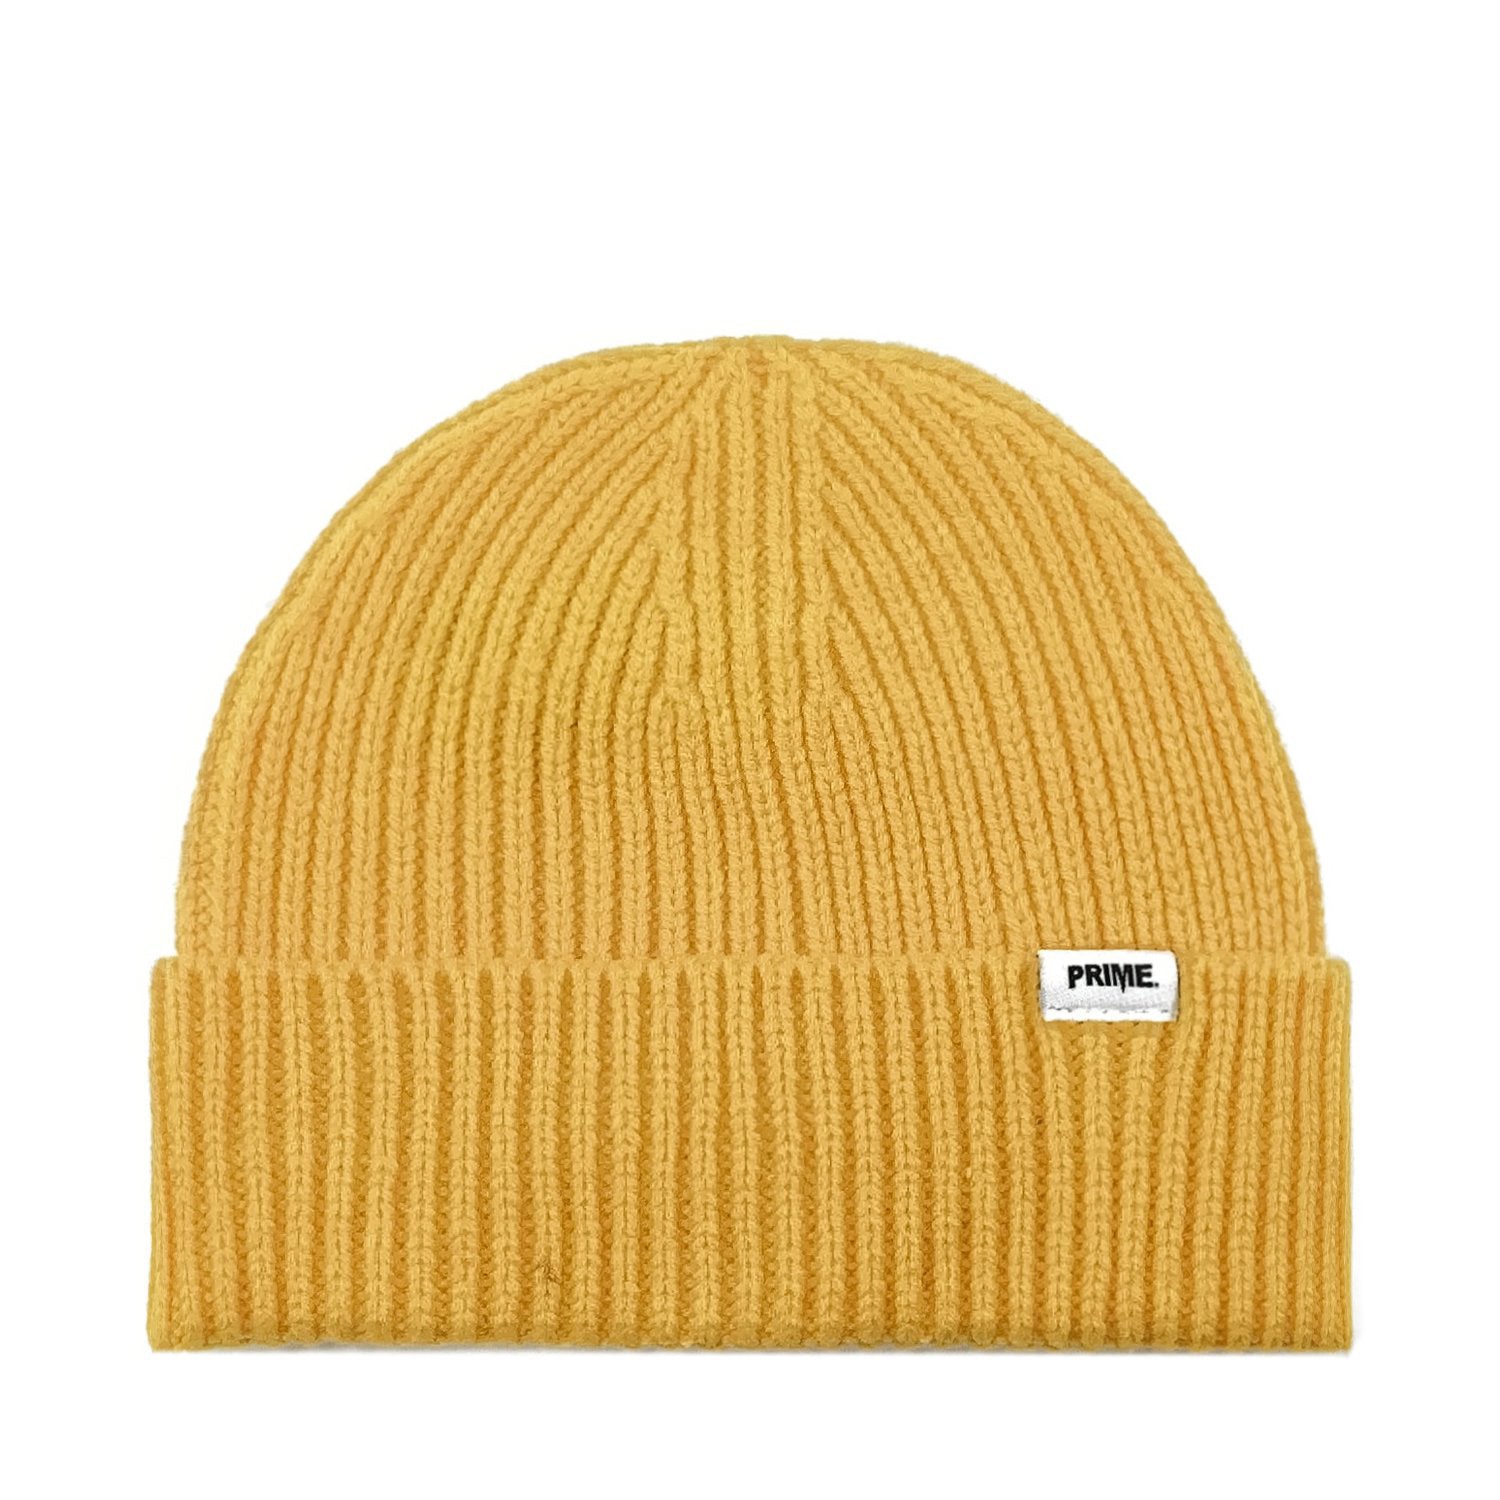 Prime Delux Cable Knit Beanie - Gold Yellow - Prime Delux Store